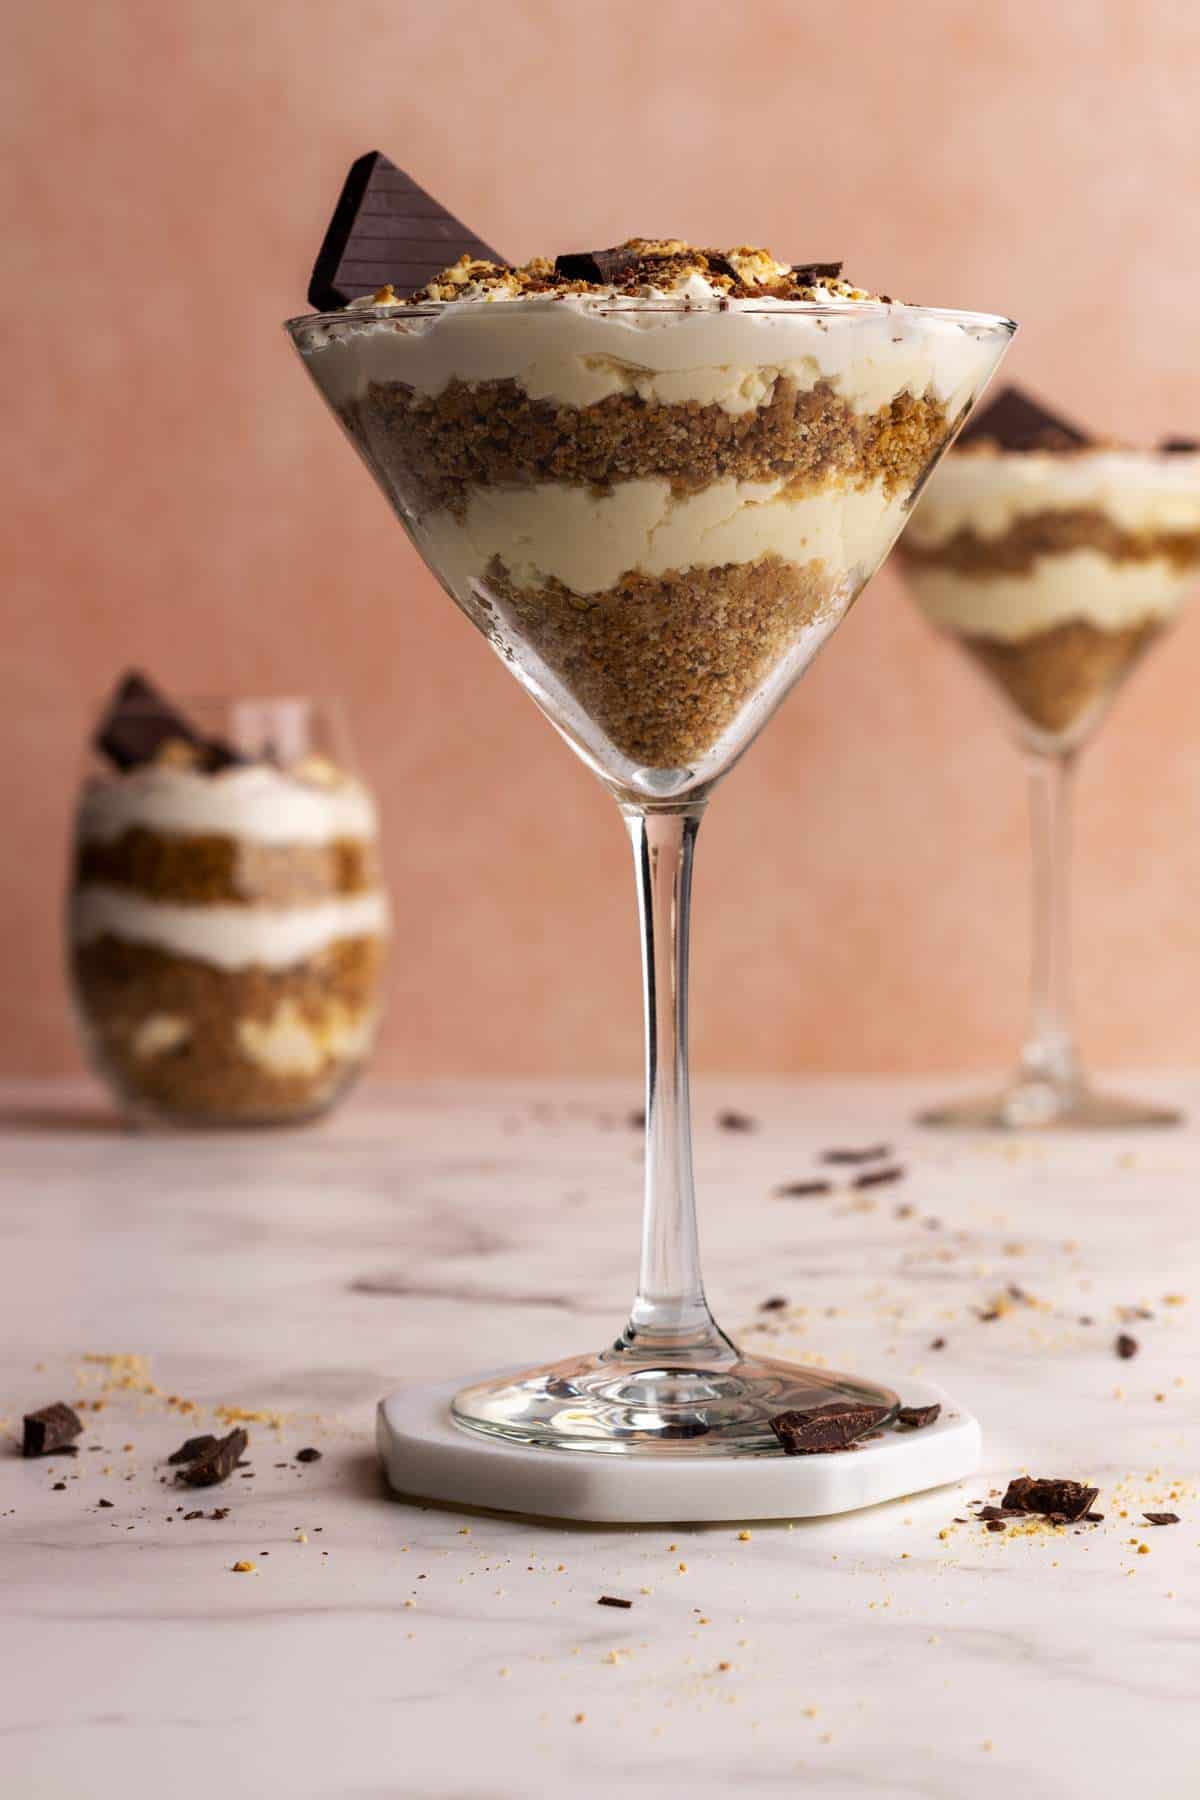 Biscuits parfait desserts layered in a glass.